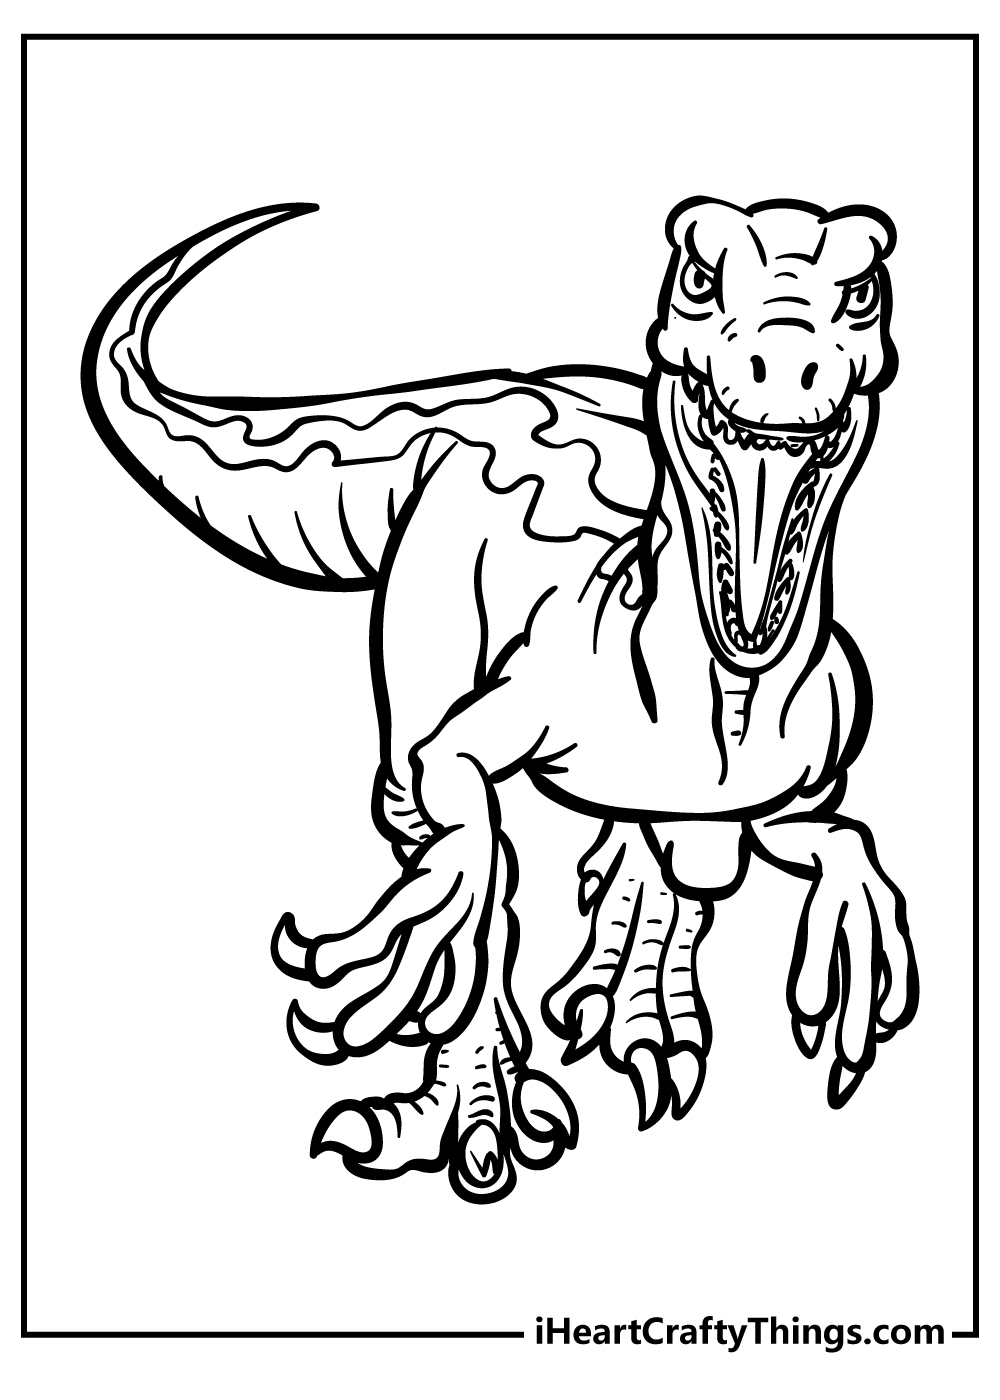 Jurassic World Coloring Pages for adults free printable